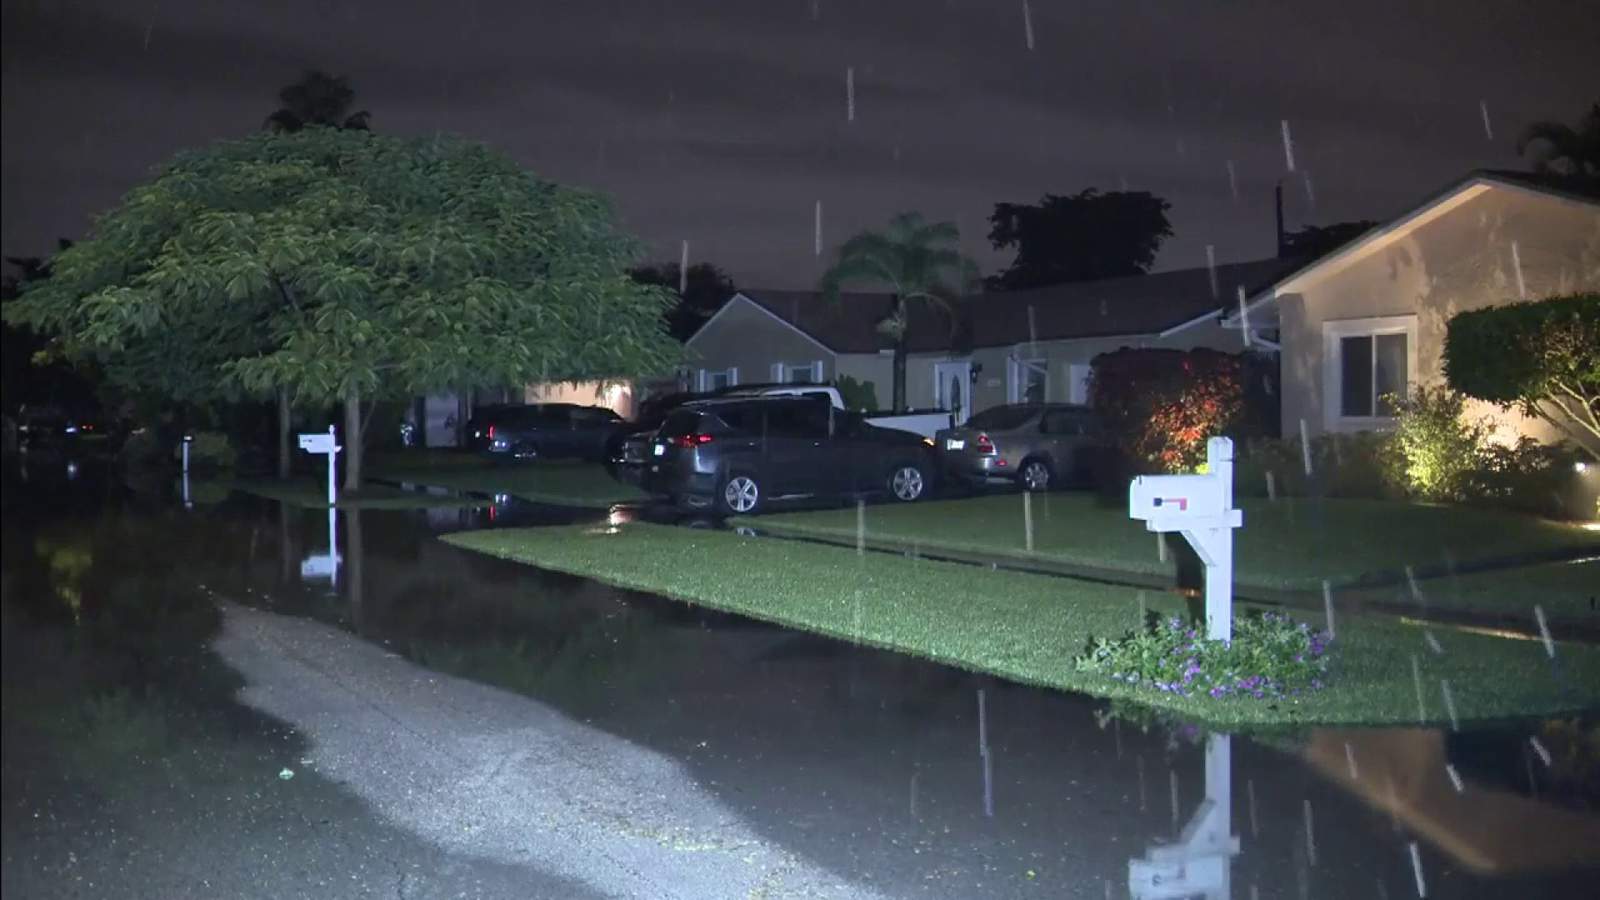 Wet weekend across South Florida causing flooding issues for many in Broward County